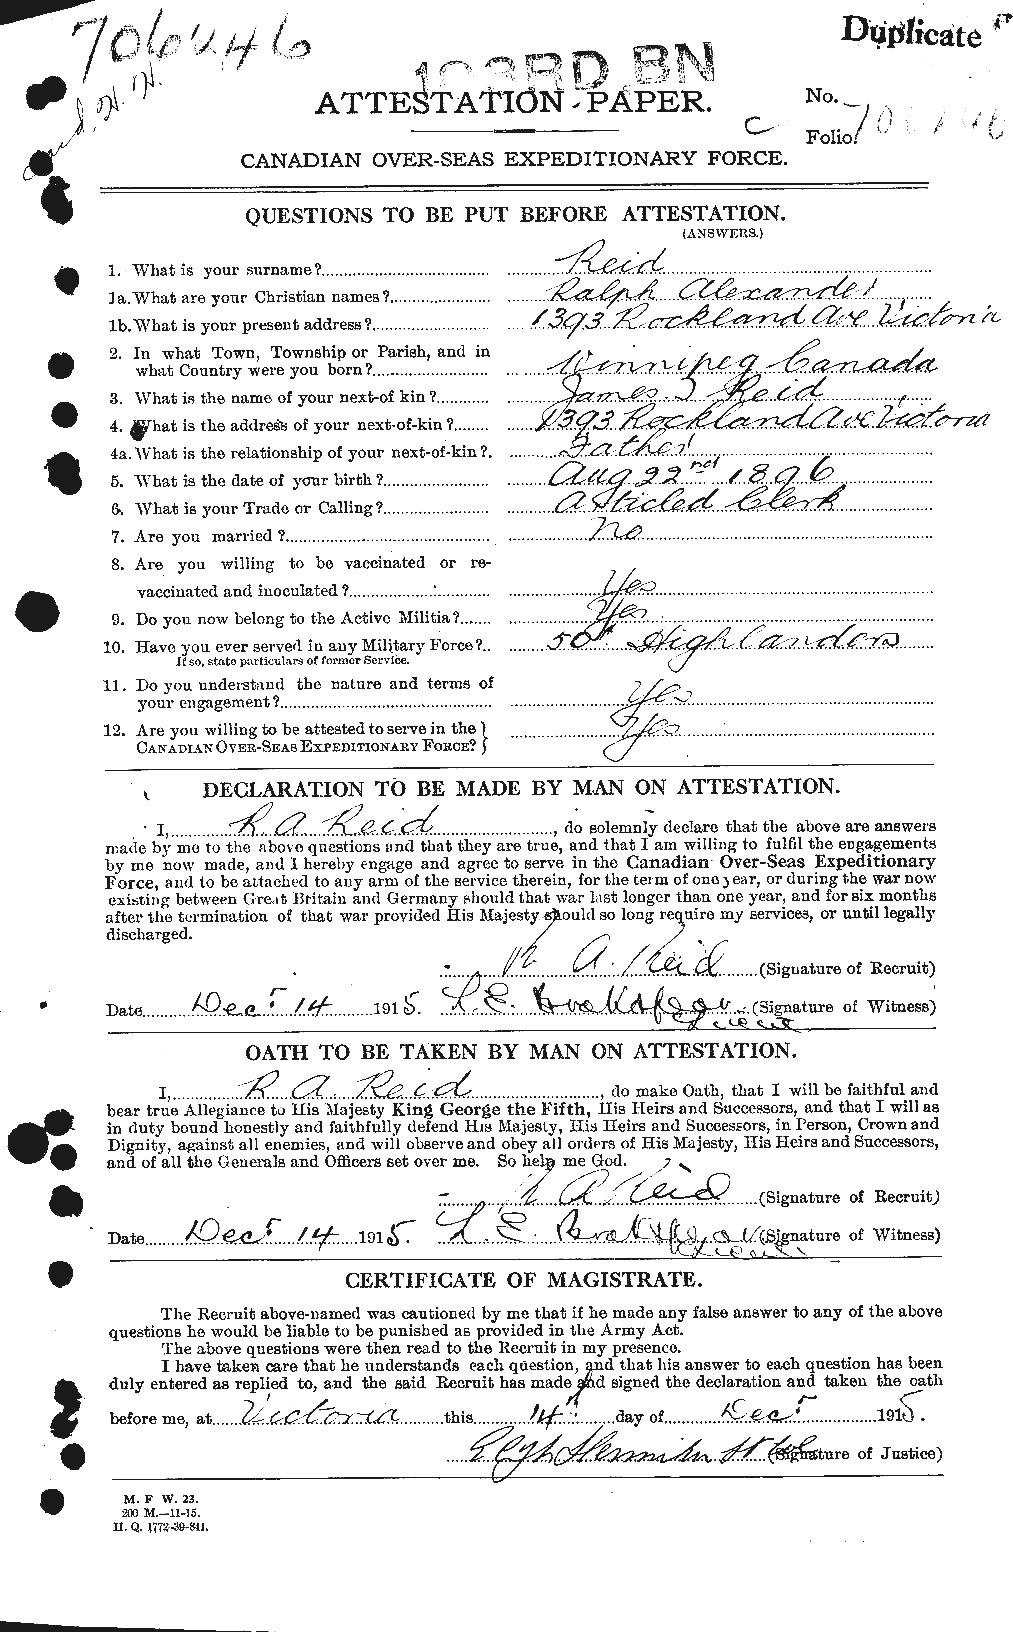 Personnel Records of the First World War - CEF 601848a